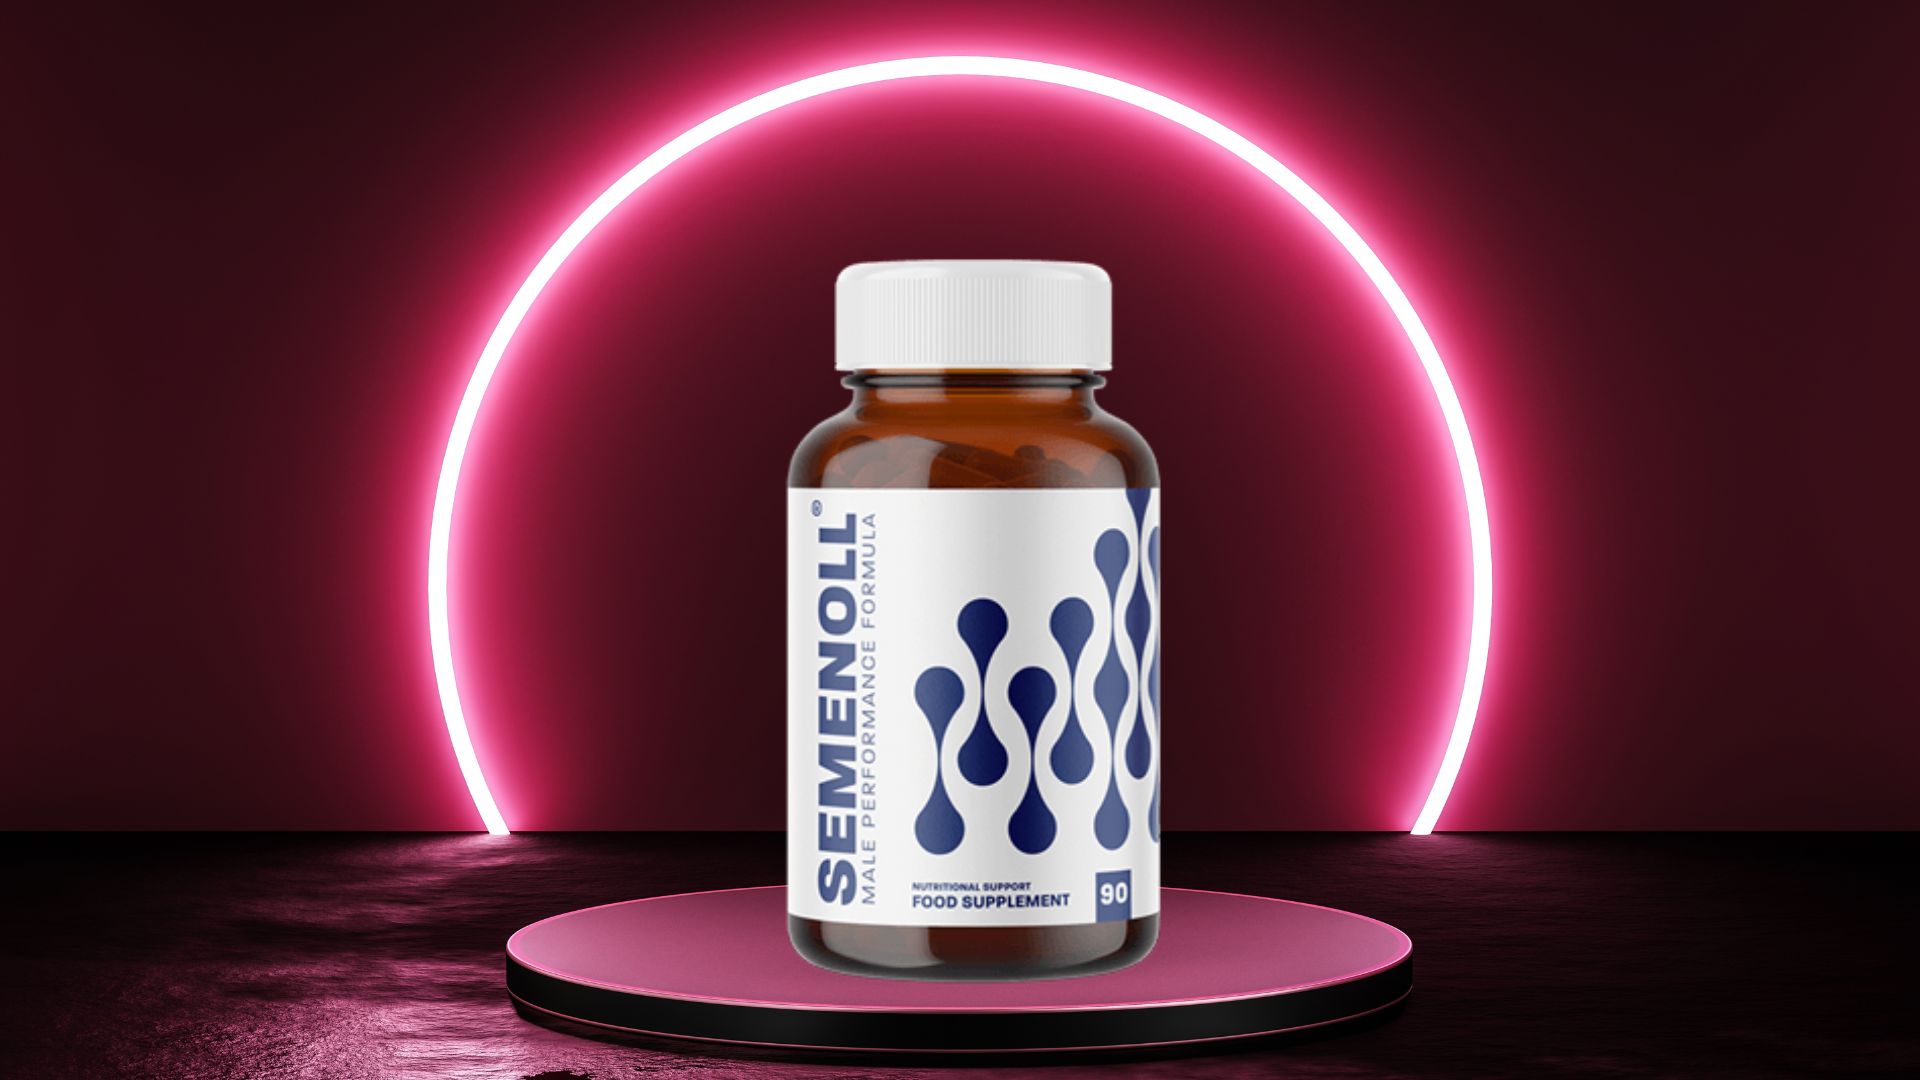 Semenoll Reviews – Support Male Fertility And Bedroom Performance